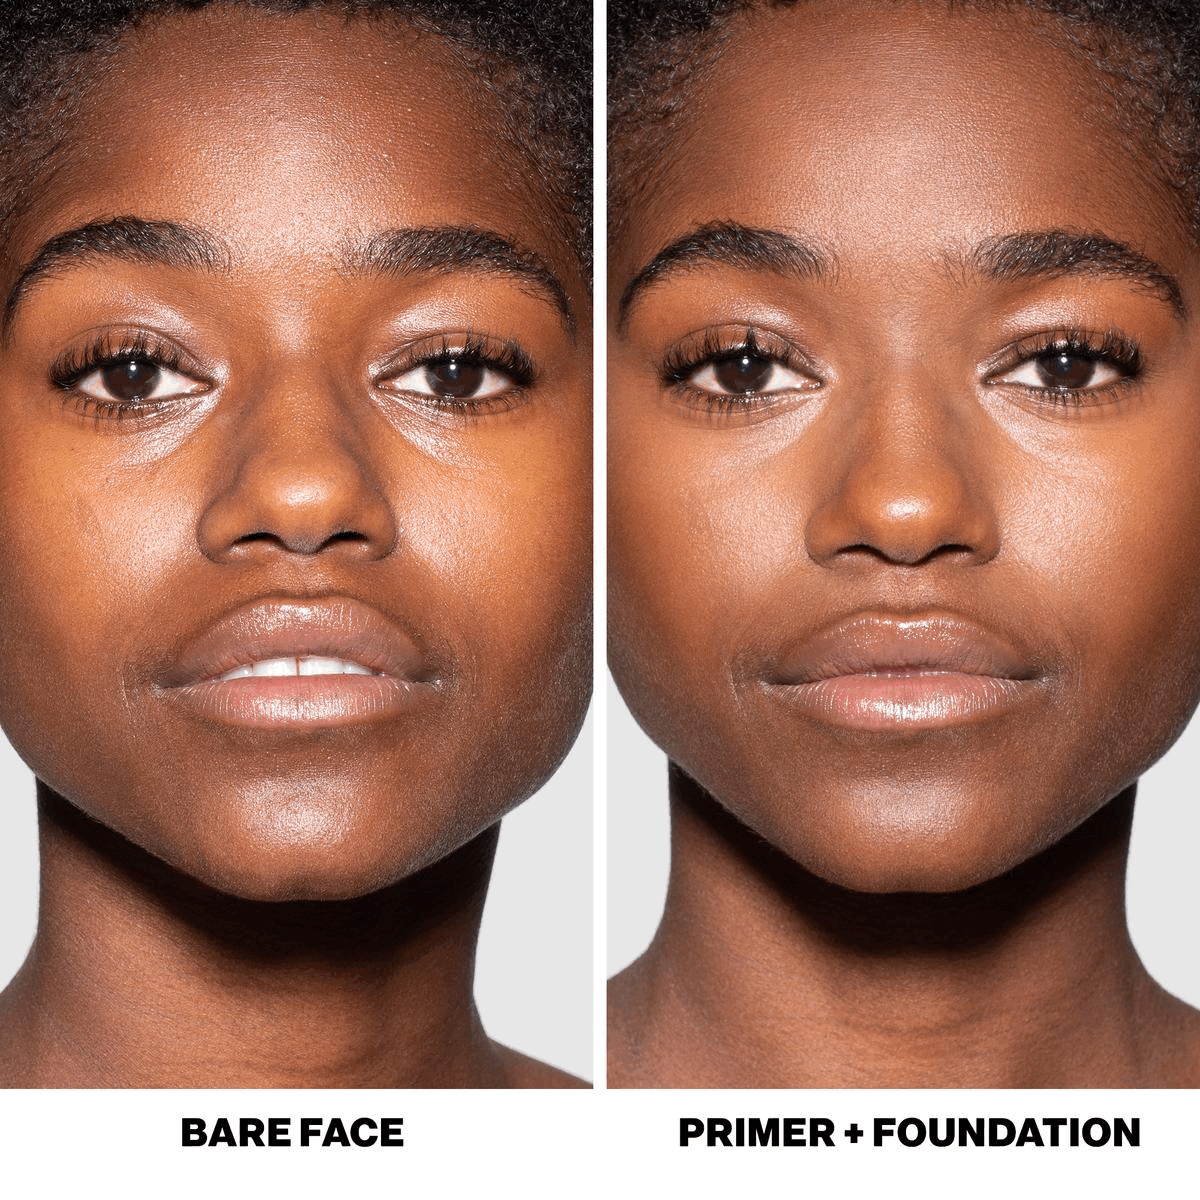 Image 1, Bare Faced with Primer and Foundation. Image 2, the original photo finish smooth and blur primer makeup sponge test